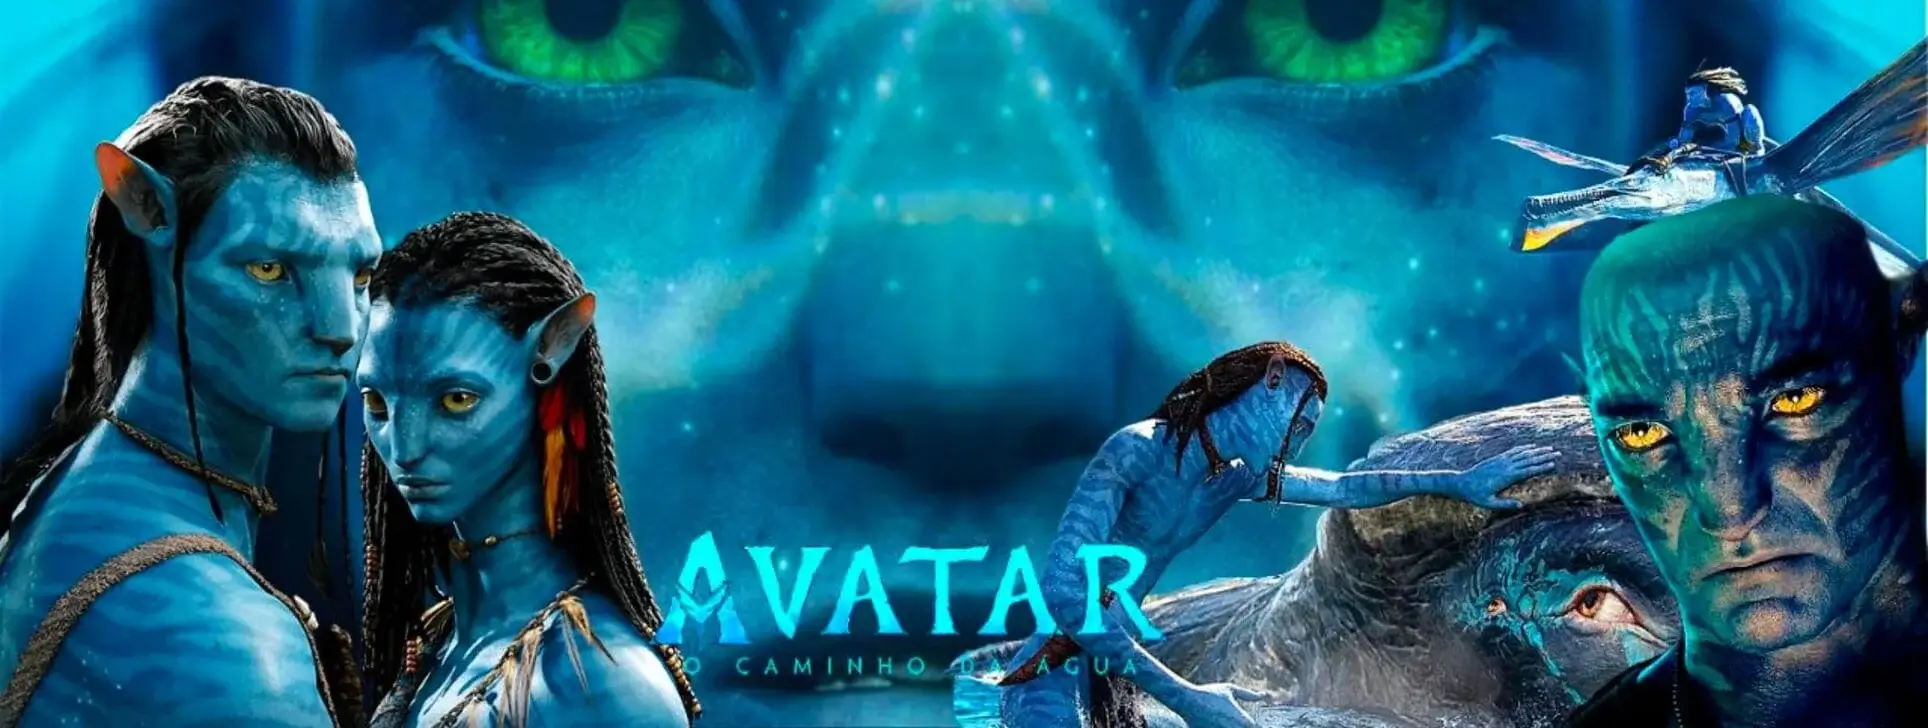 Avatar: The Way of Water 3D VR online 2022